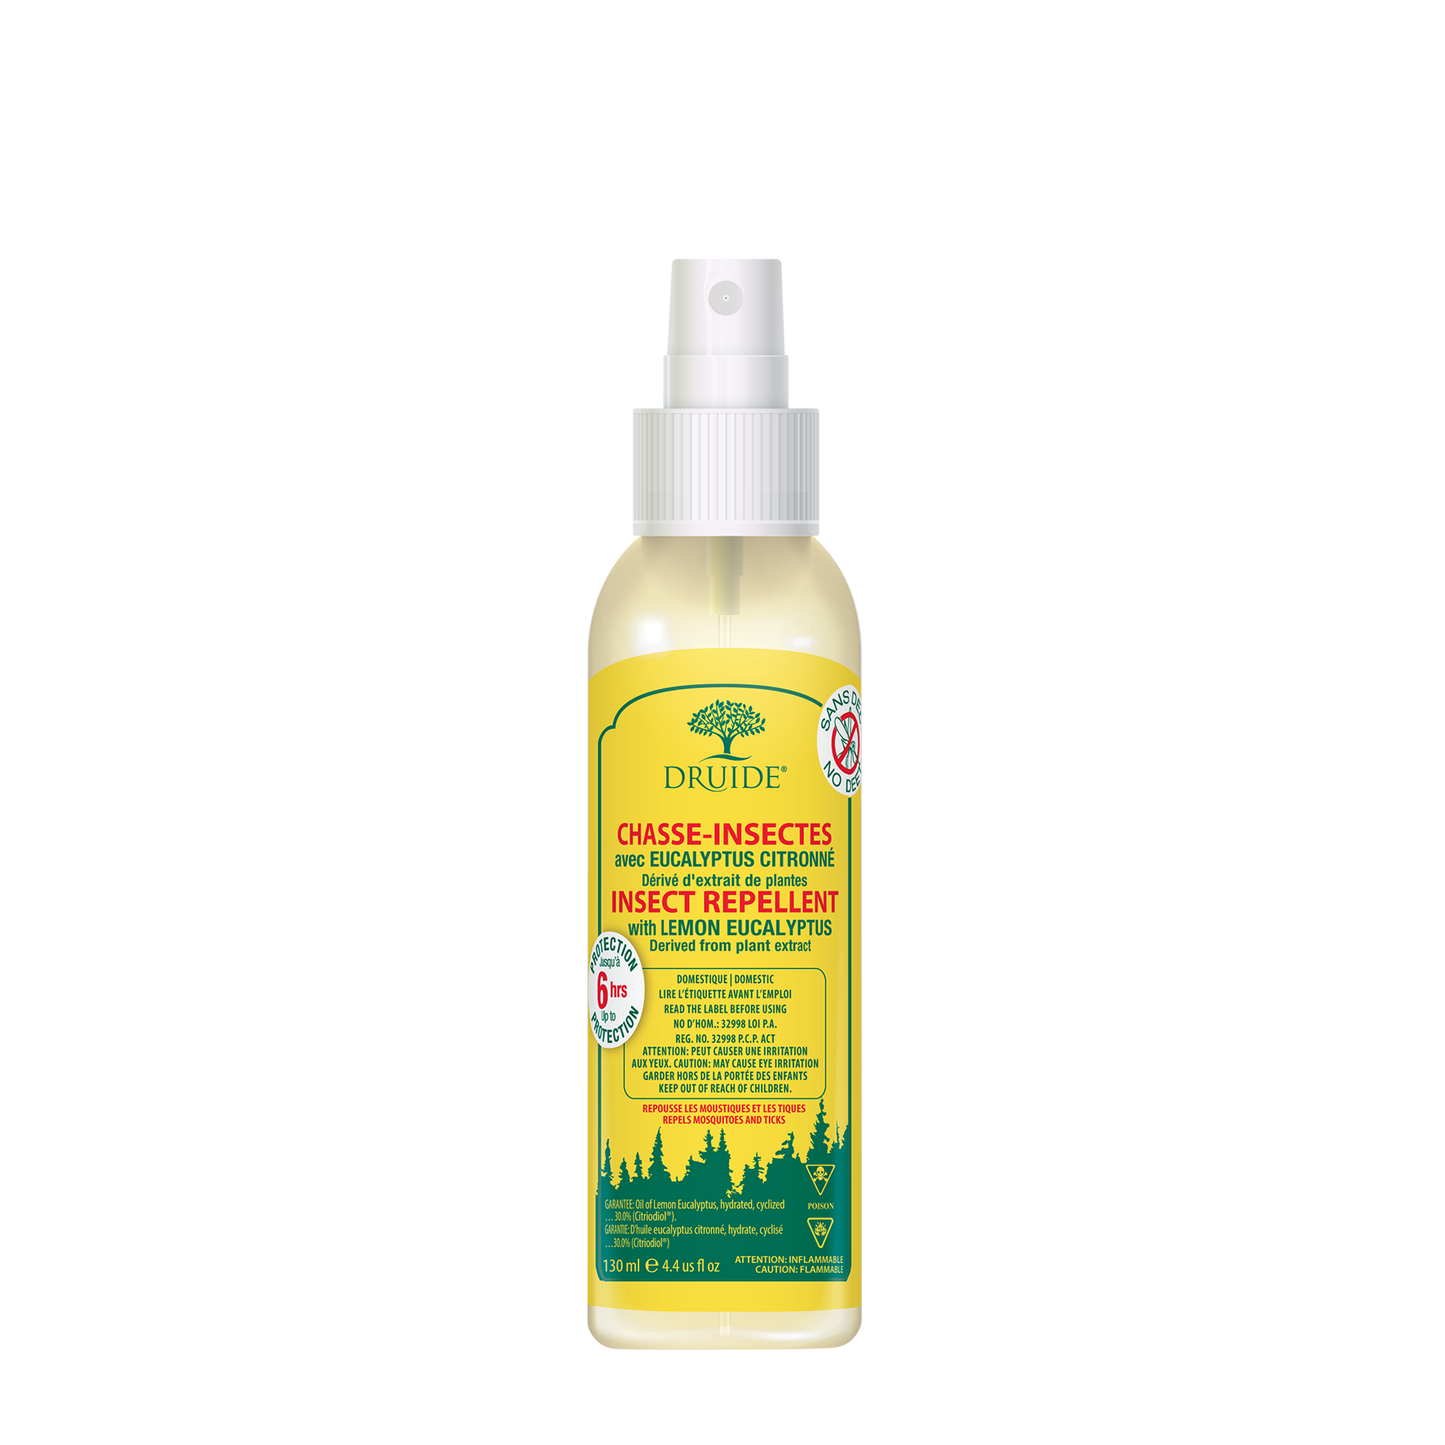 All Natural Insect Repellant by Druide